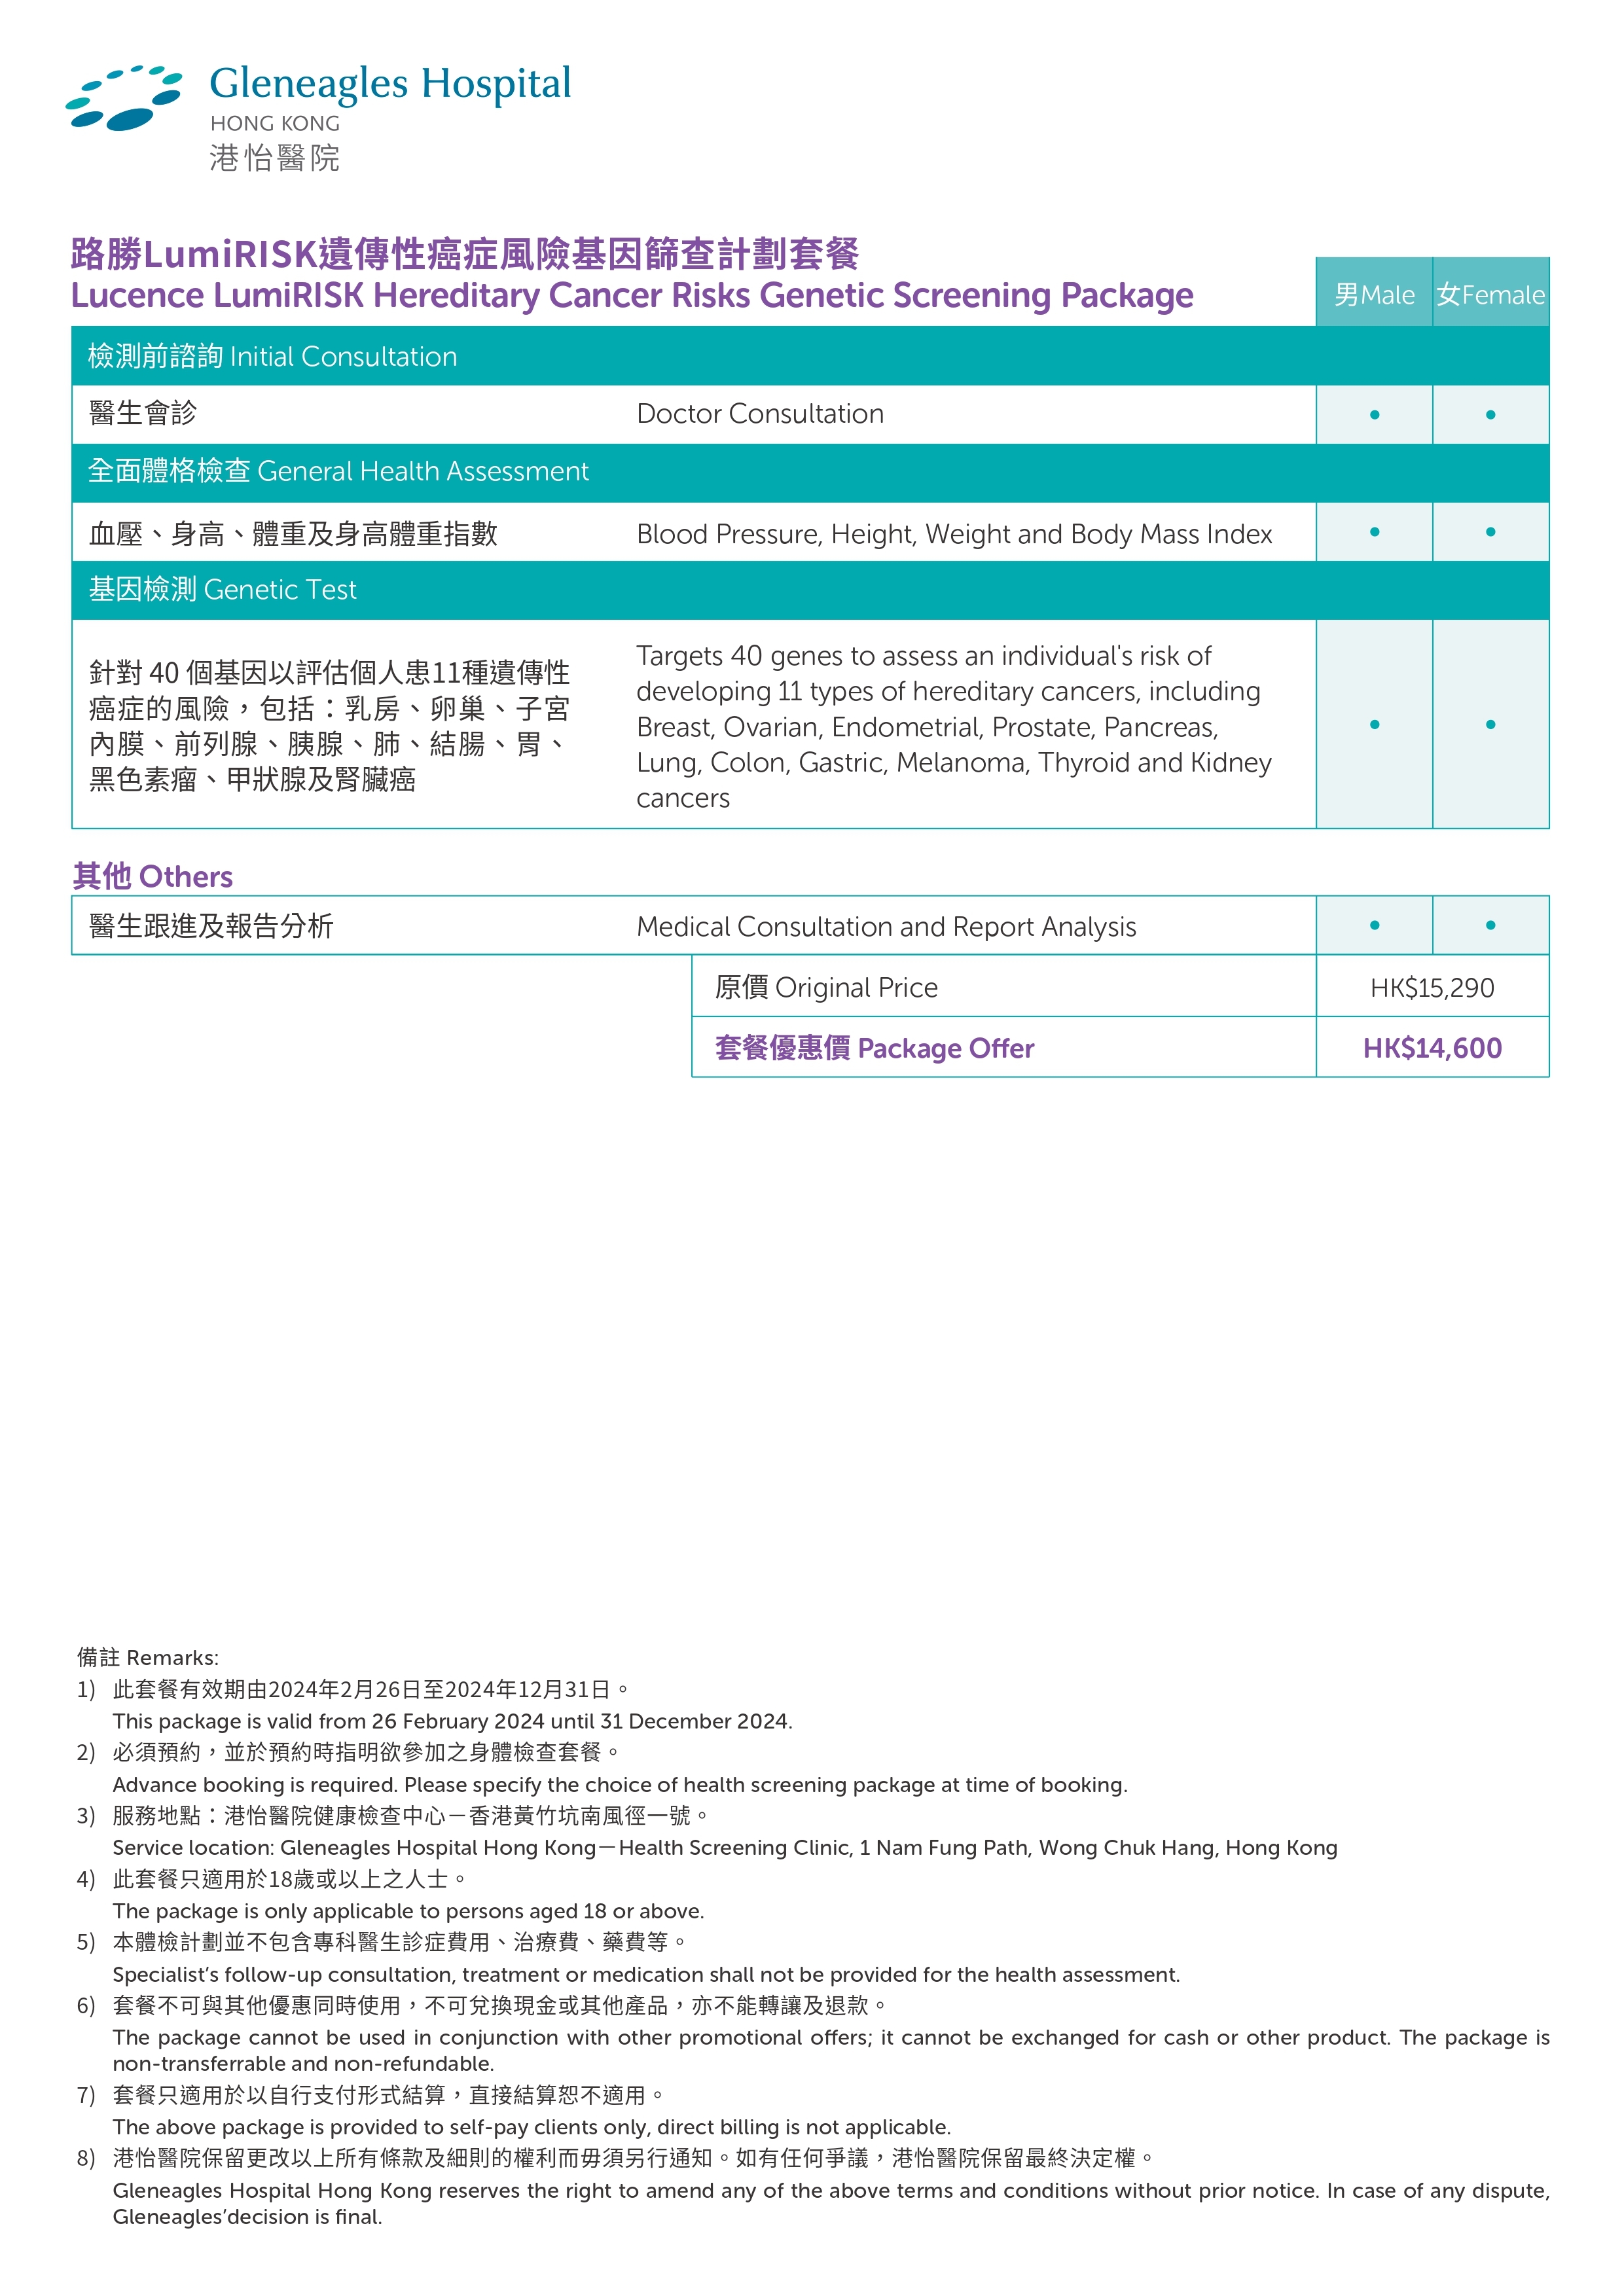 GHK-Hereditary-Cancer-Risks-Genetic-Screening-Package-Leaflets_01_page-0001.jpg#asset:275075